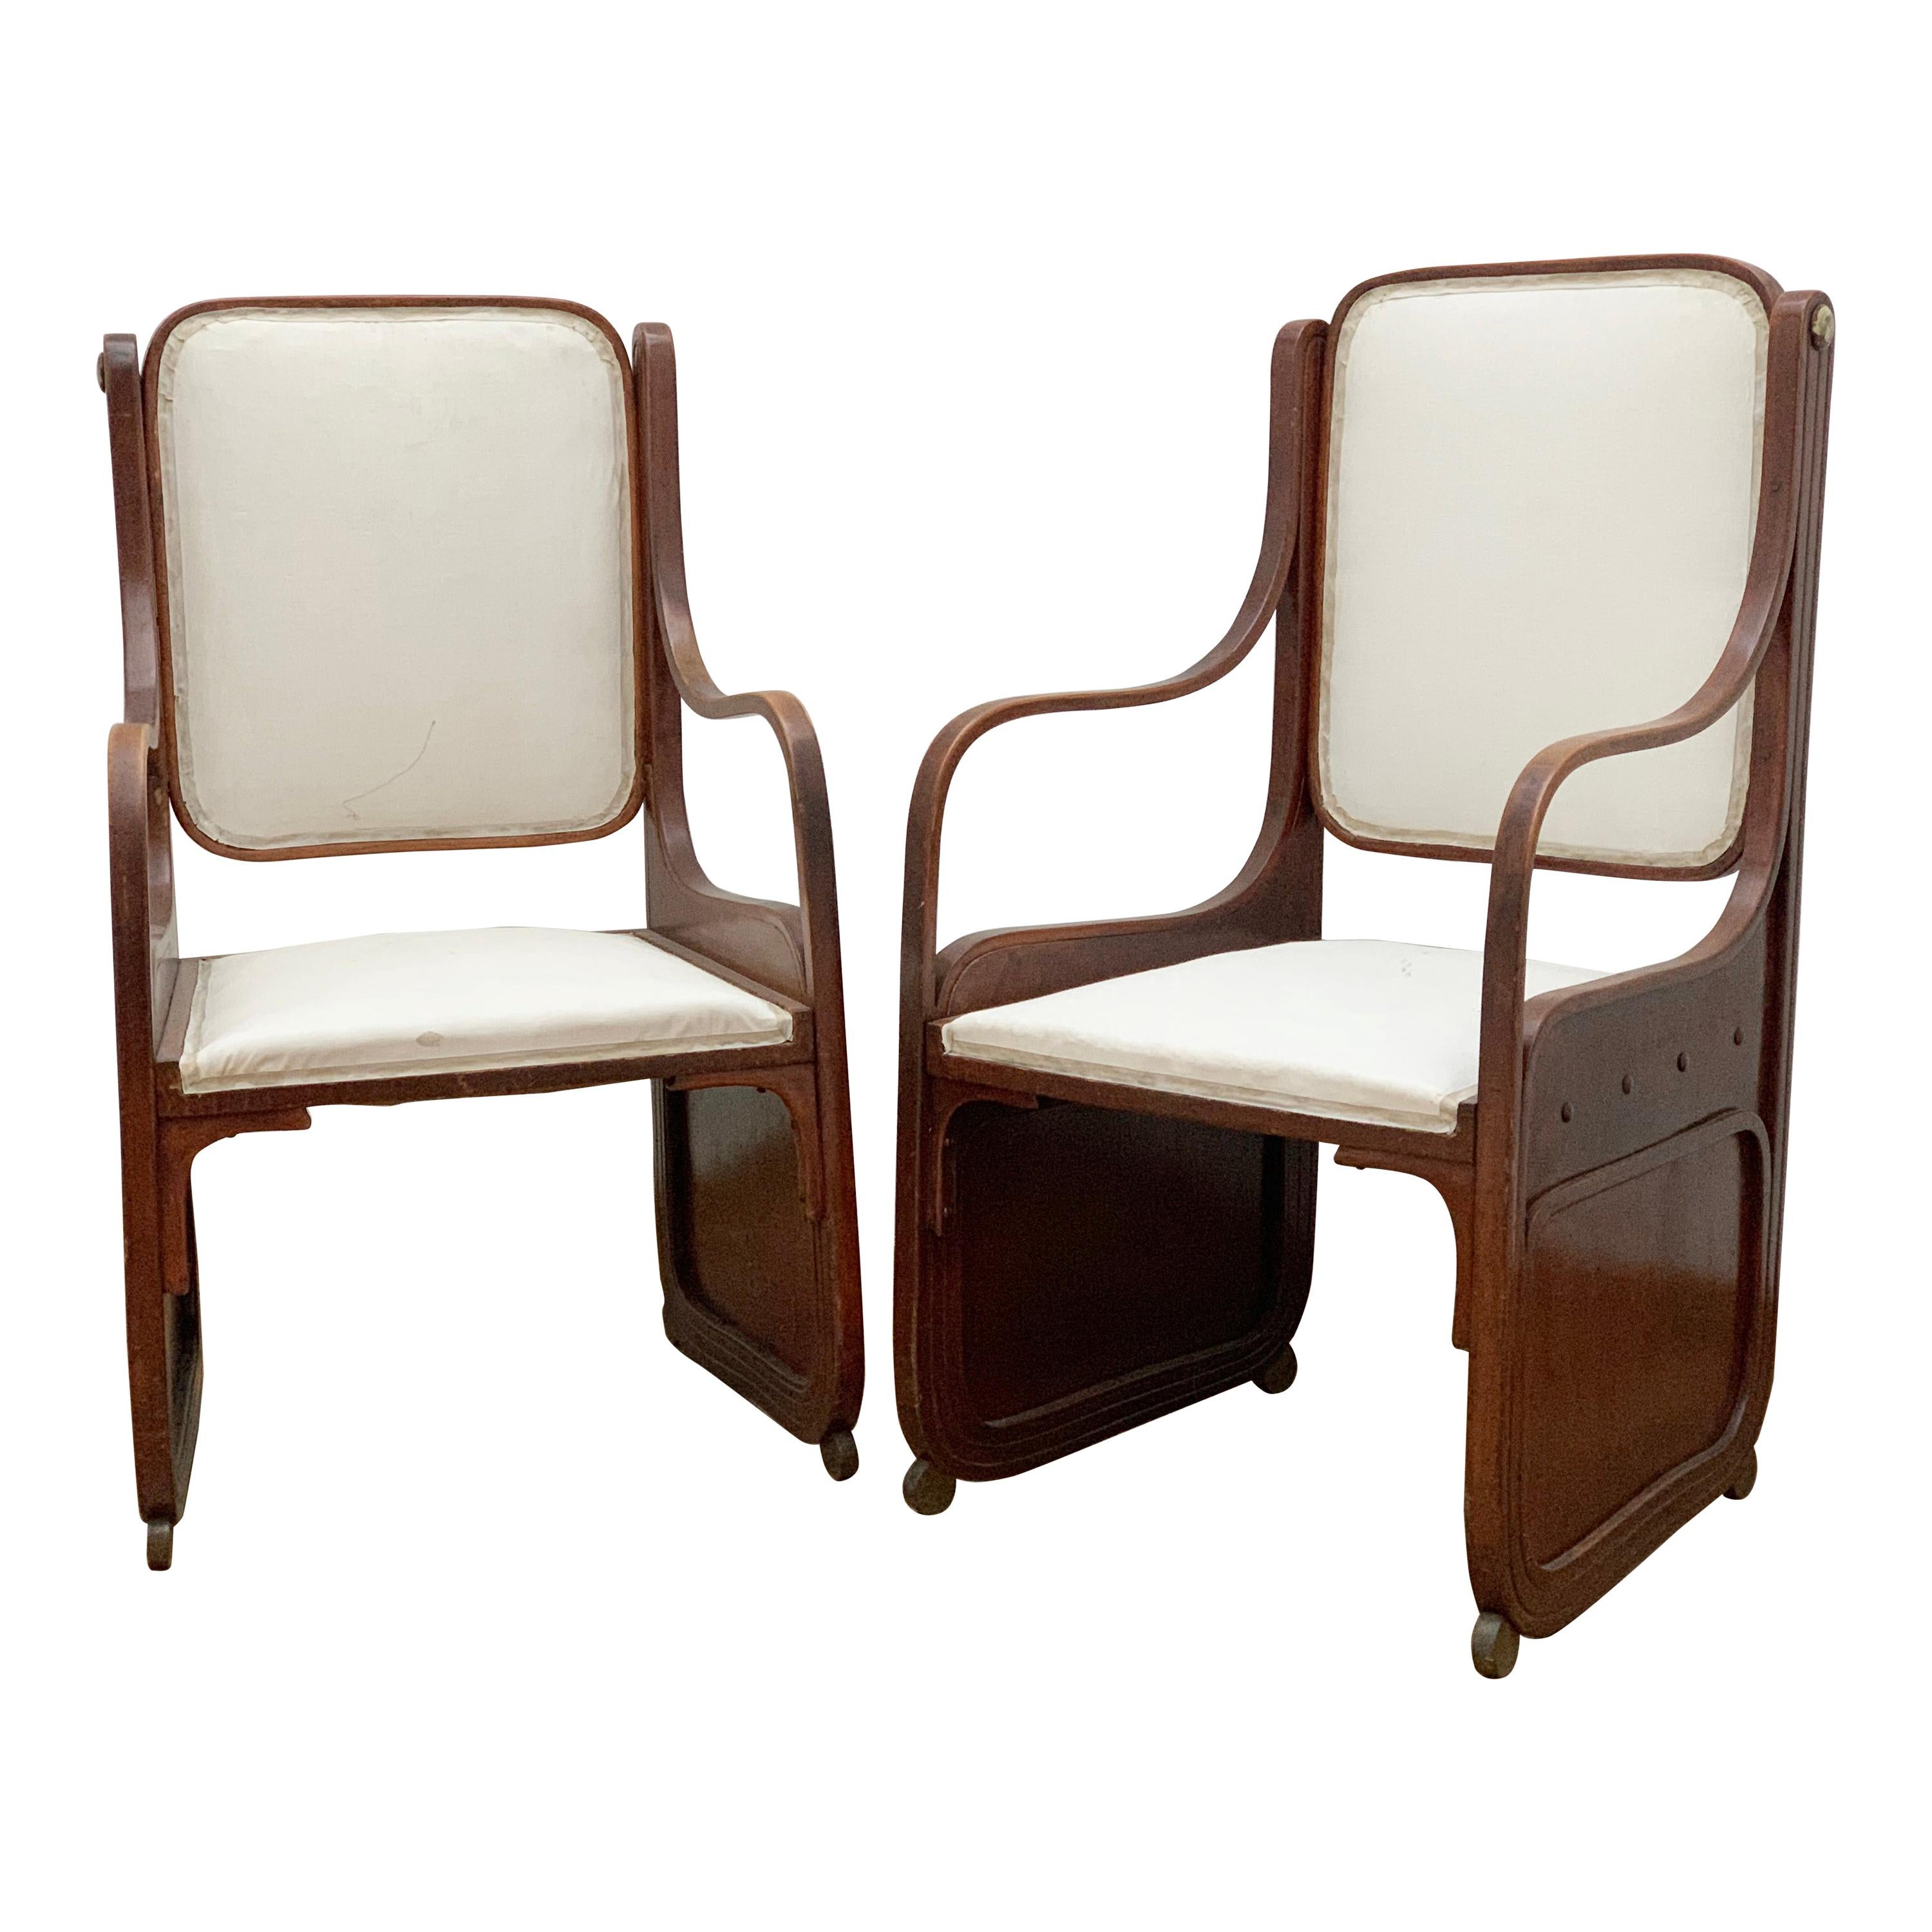 Pair of Bentwood Armchairs by Koloman Moser, Viennese Secession, circa 1900 For Sale